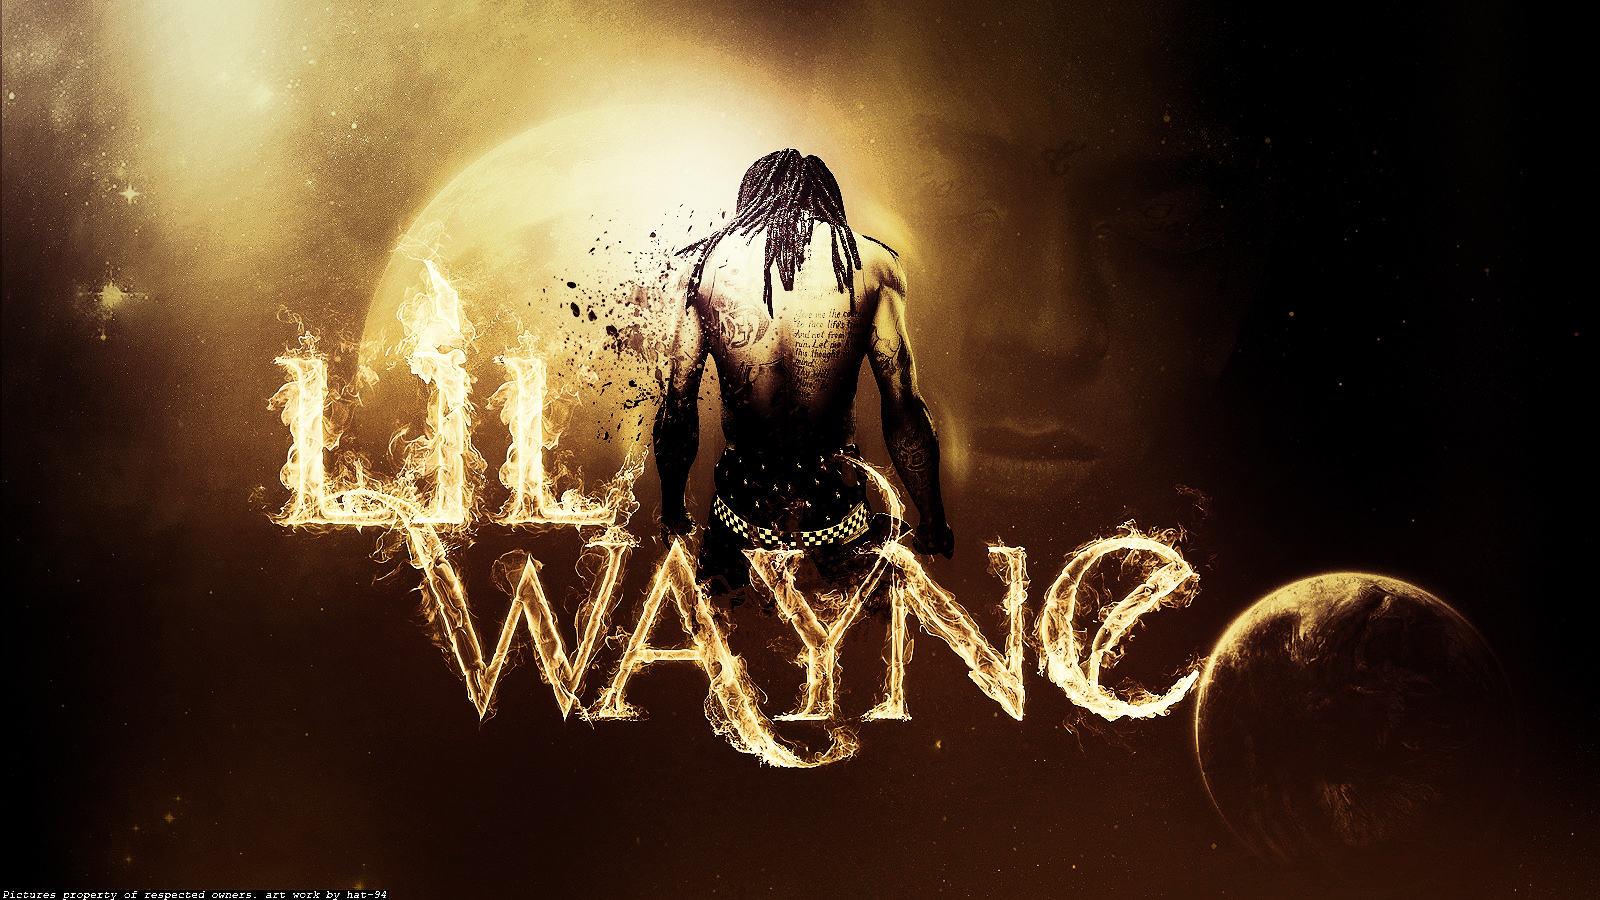 Lil Wayne HD 7 background for your phone iPhone android computer 1600x900